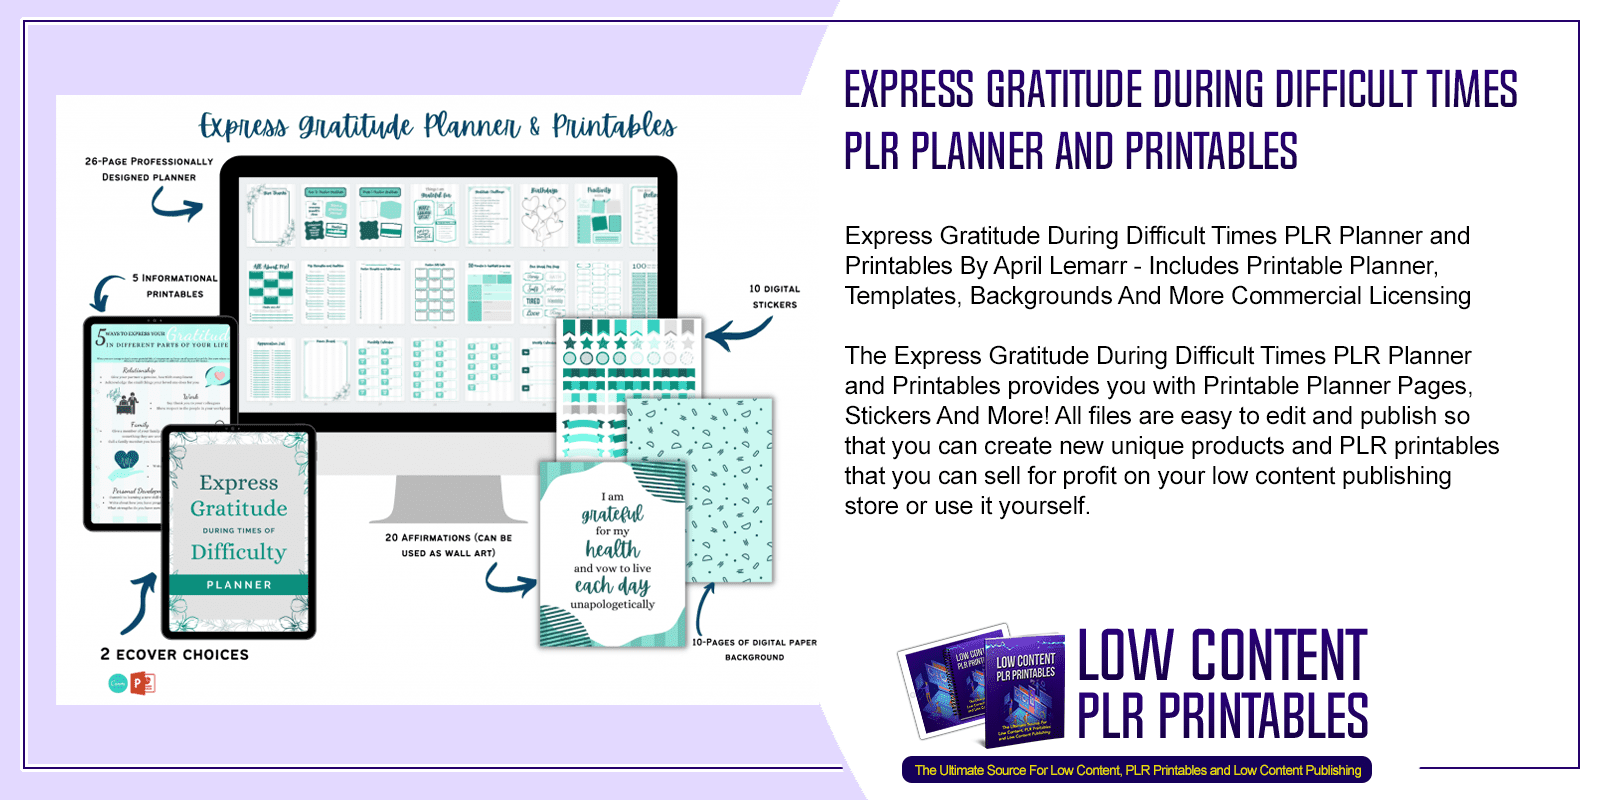 Express Gratitude During Difficult Times PLR Planner and Printables